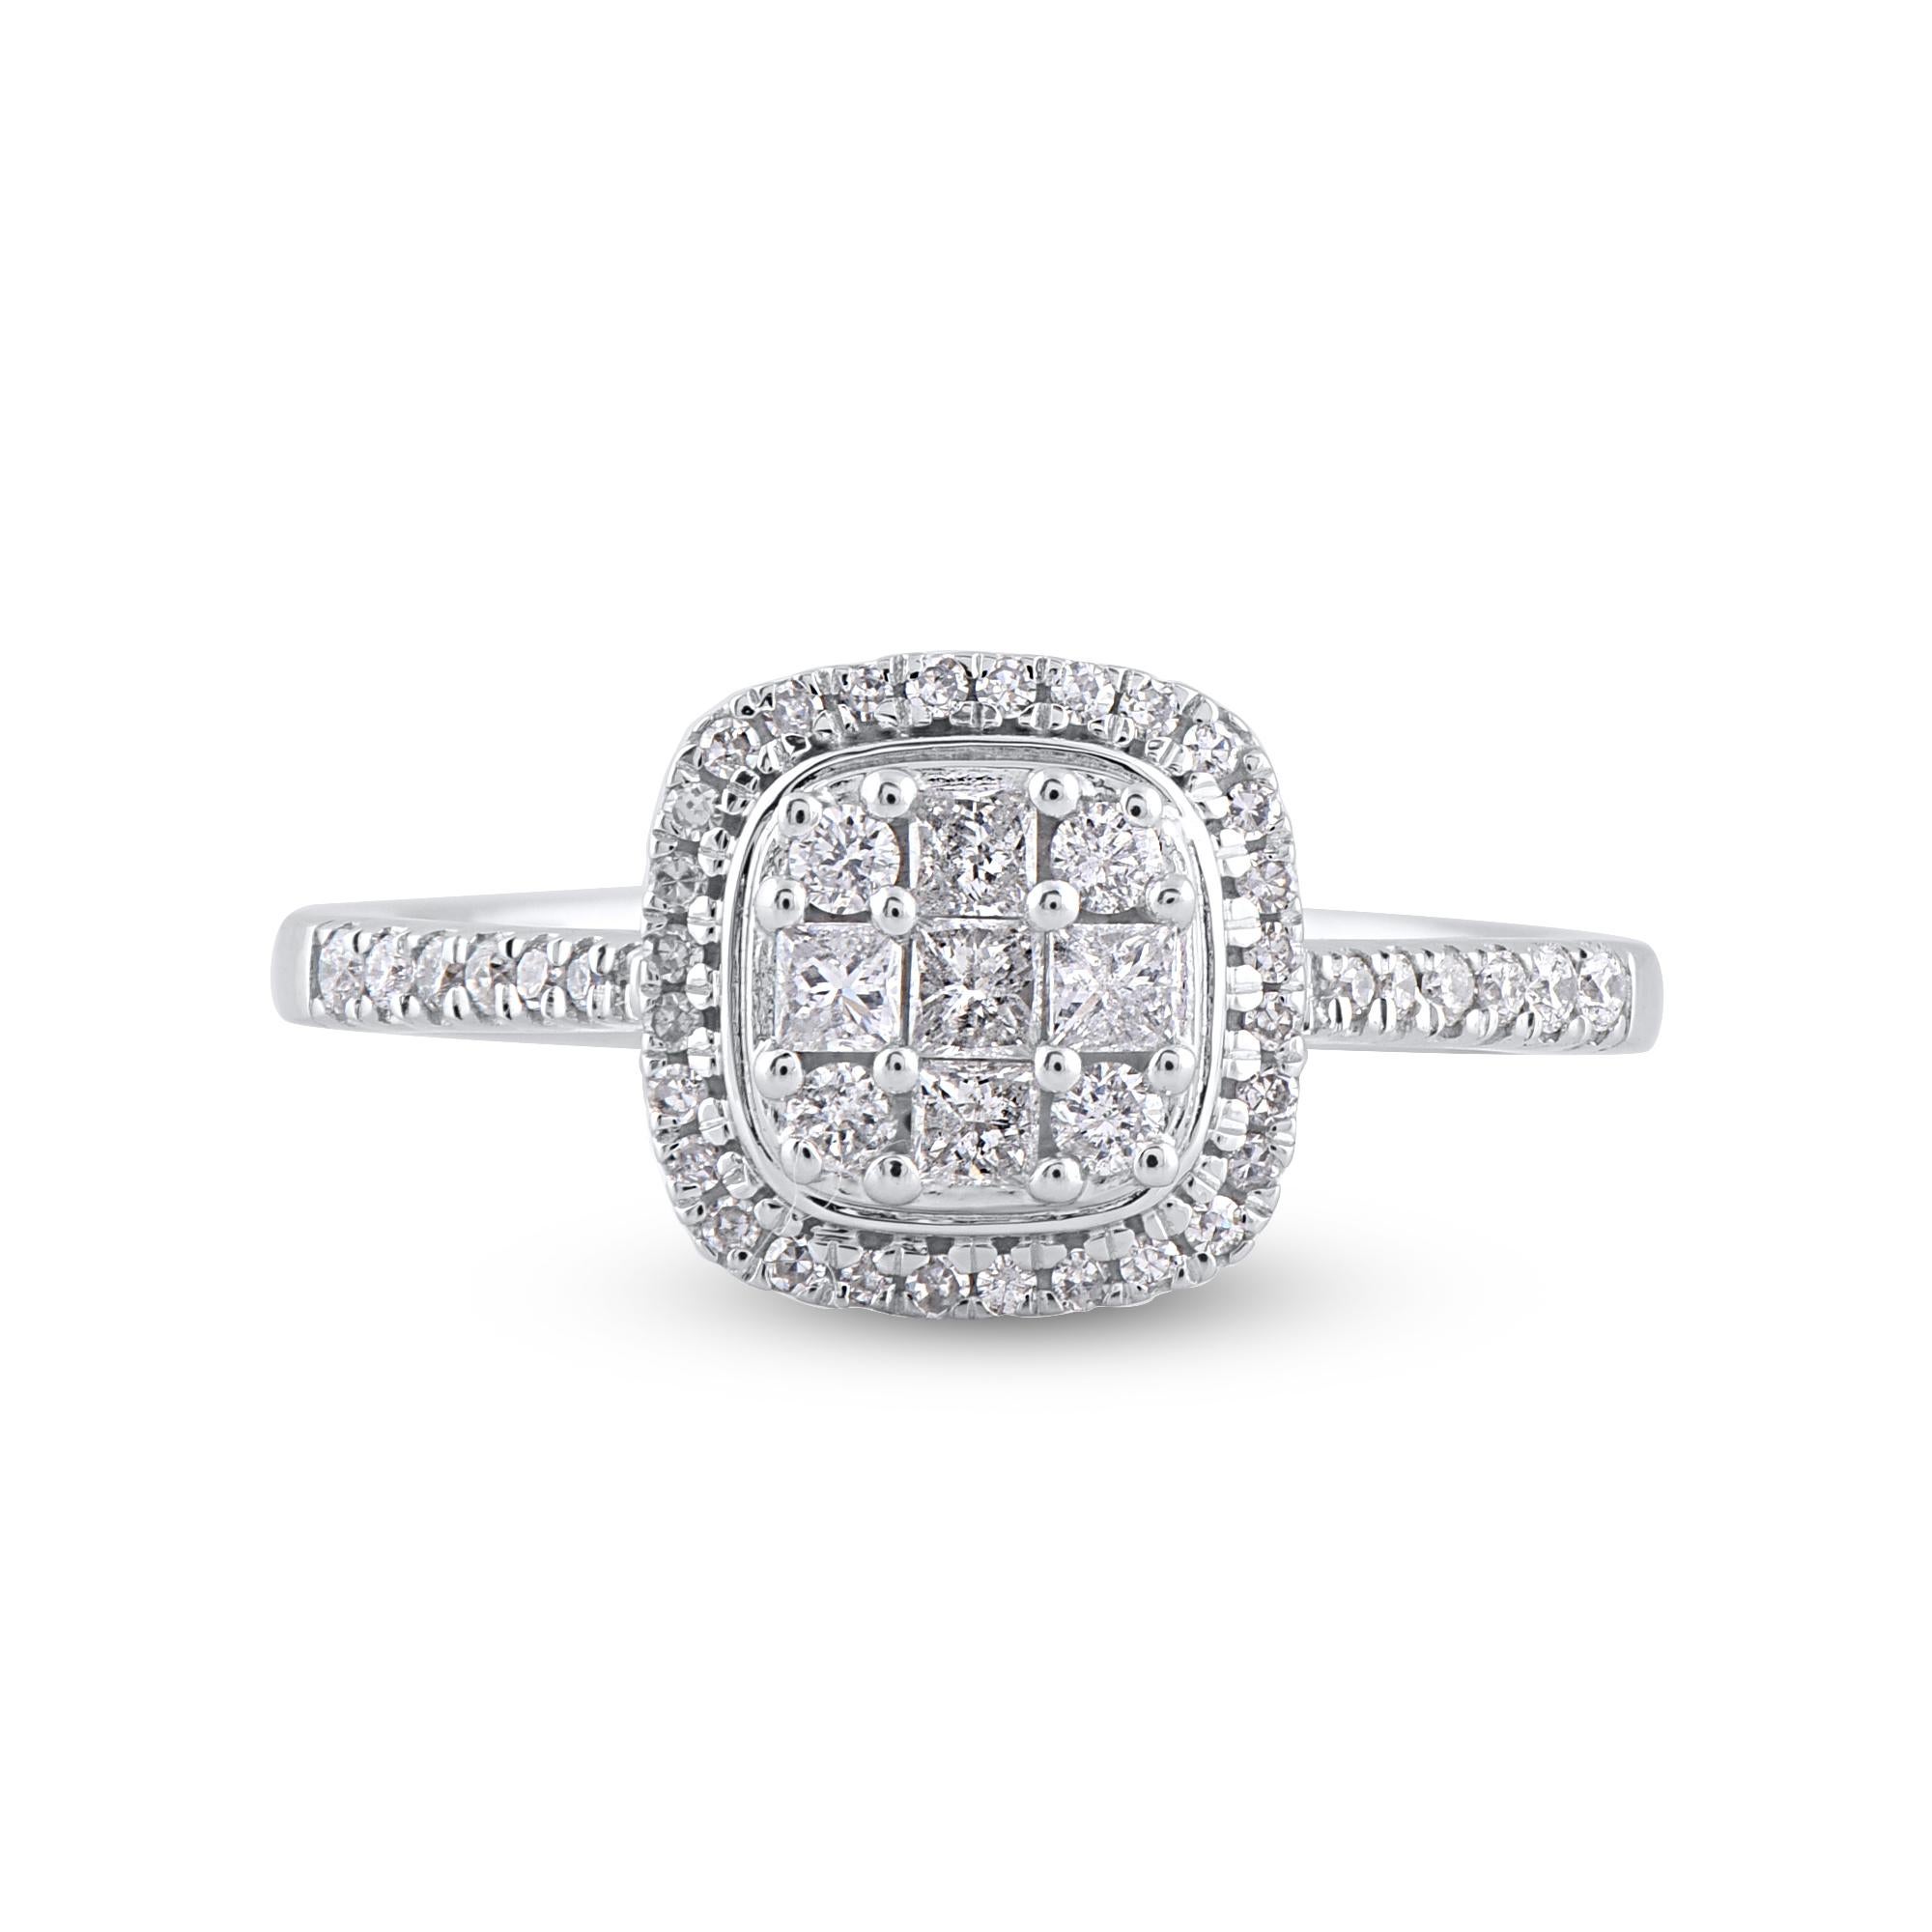 Getting engaged is one of the most special and memorable moments in life. And the perfect ring is the cherry on top! This engagement ring is expertly crafted in 14 Karat white gold. This ring features a sparkling 51 princess cut and single cut,